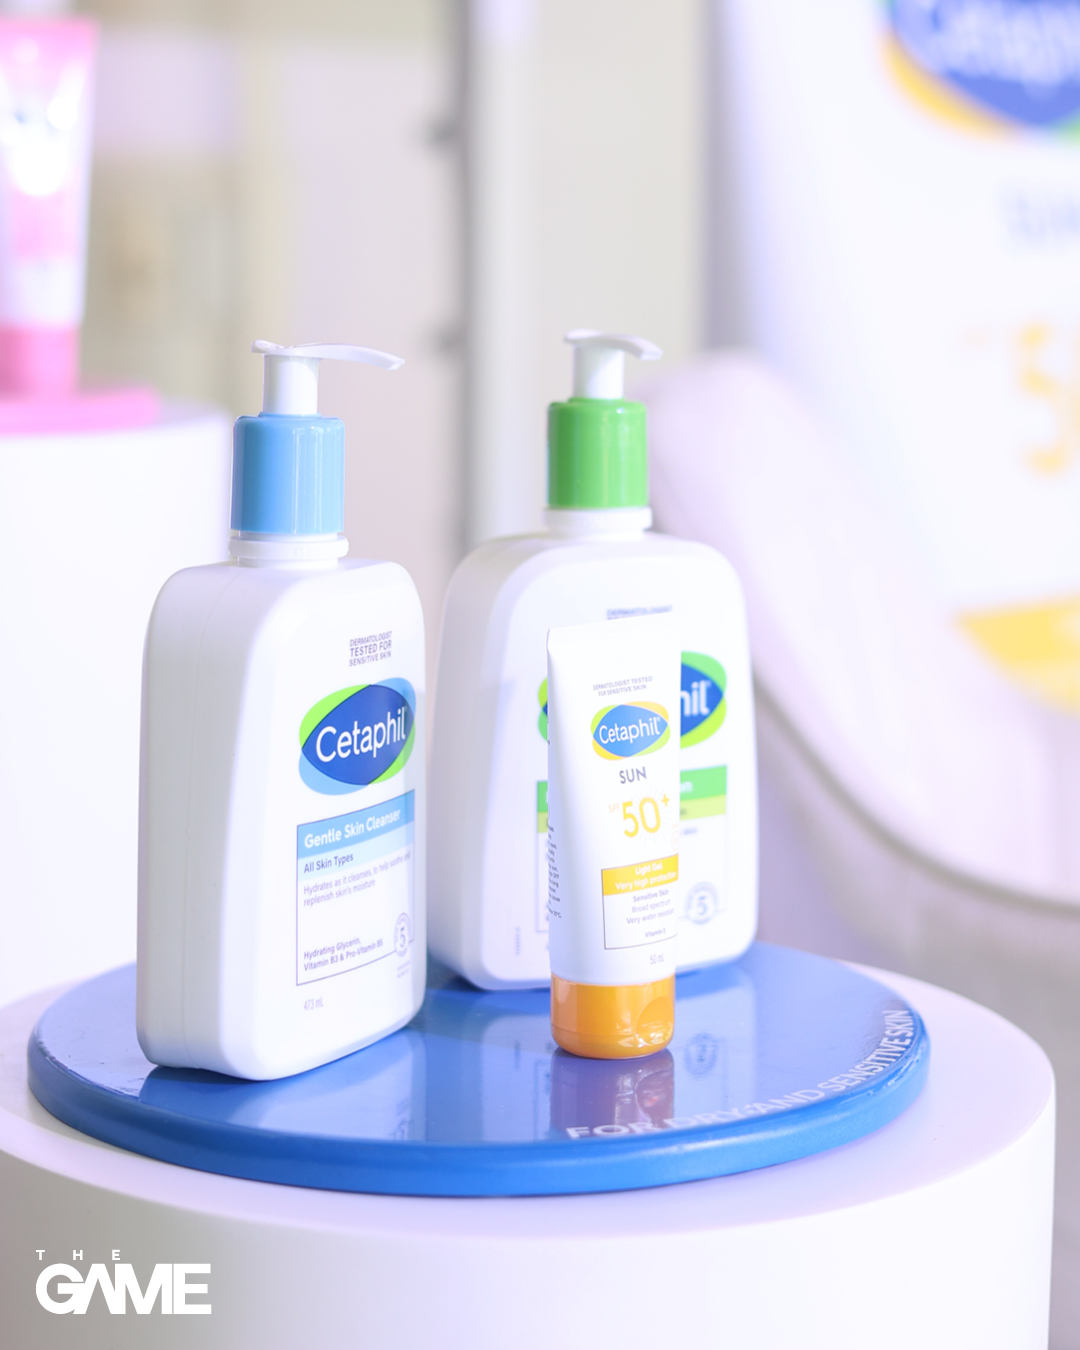 All the athletes and sports enthusiasts at #TheGAMESummer got to level up their skincare routine with Cetaphil.